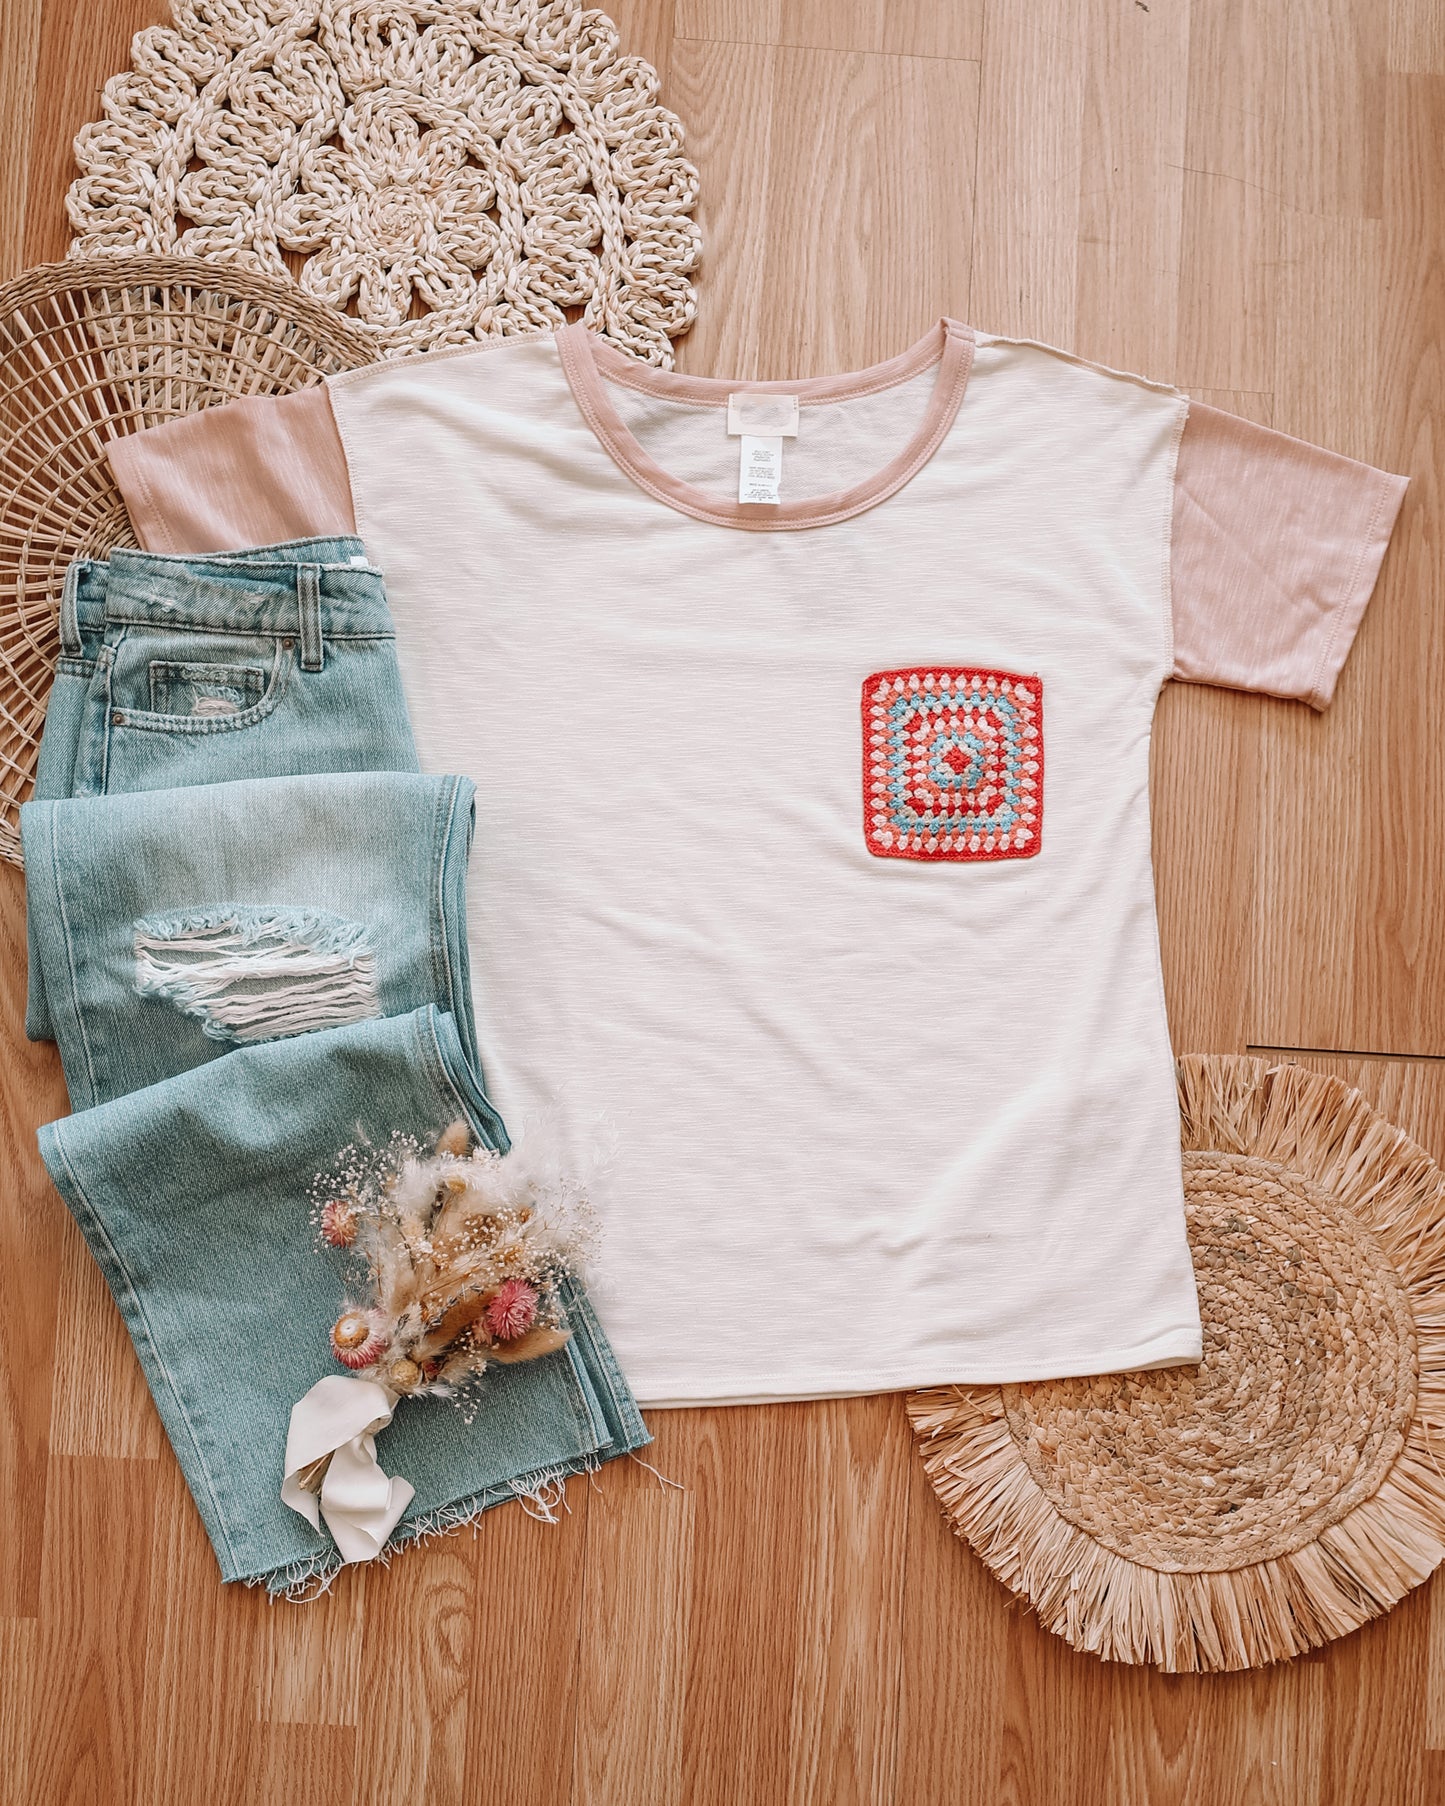 Boho style crochet pocket tee with colorblock pattern flatlay with light wash mom jeans 